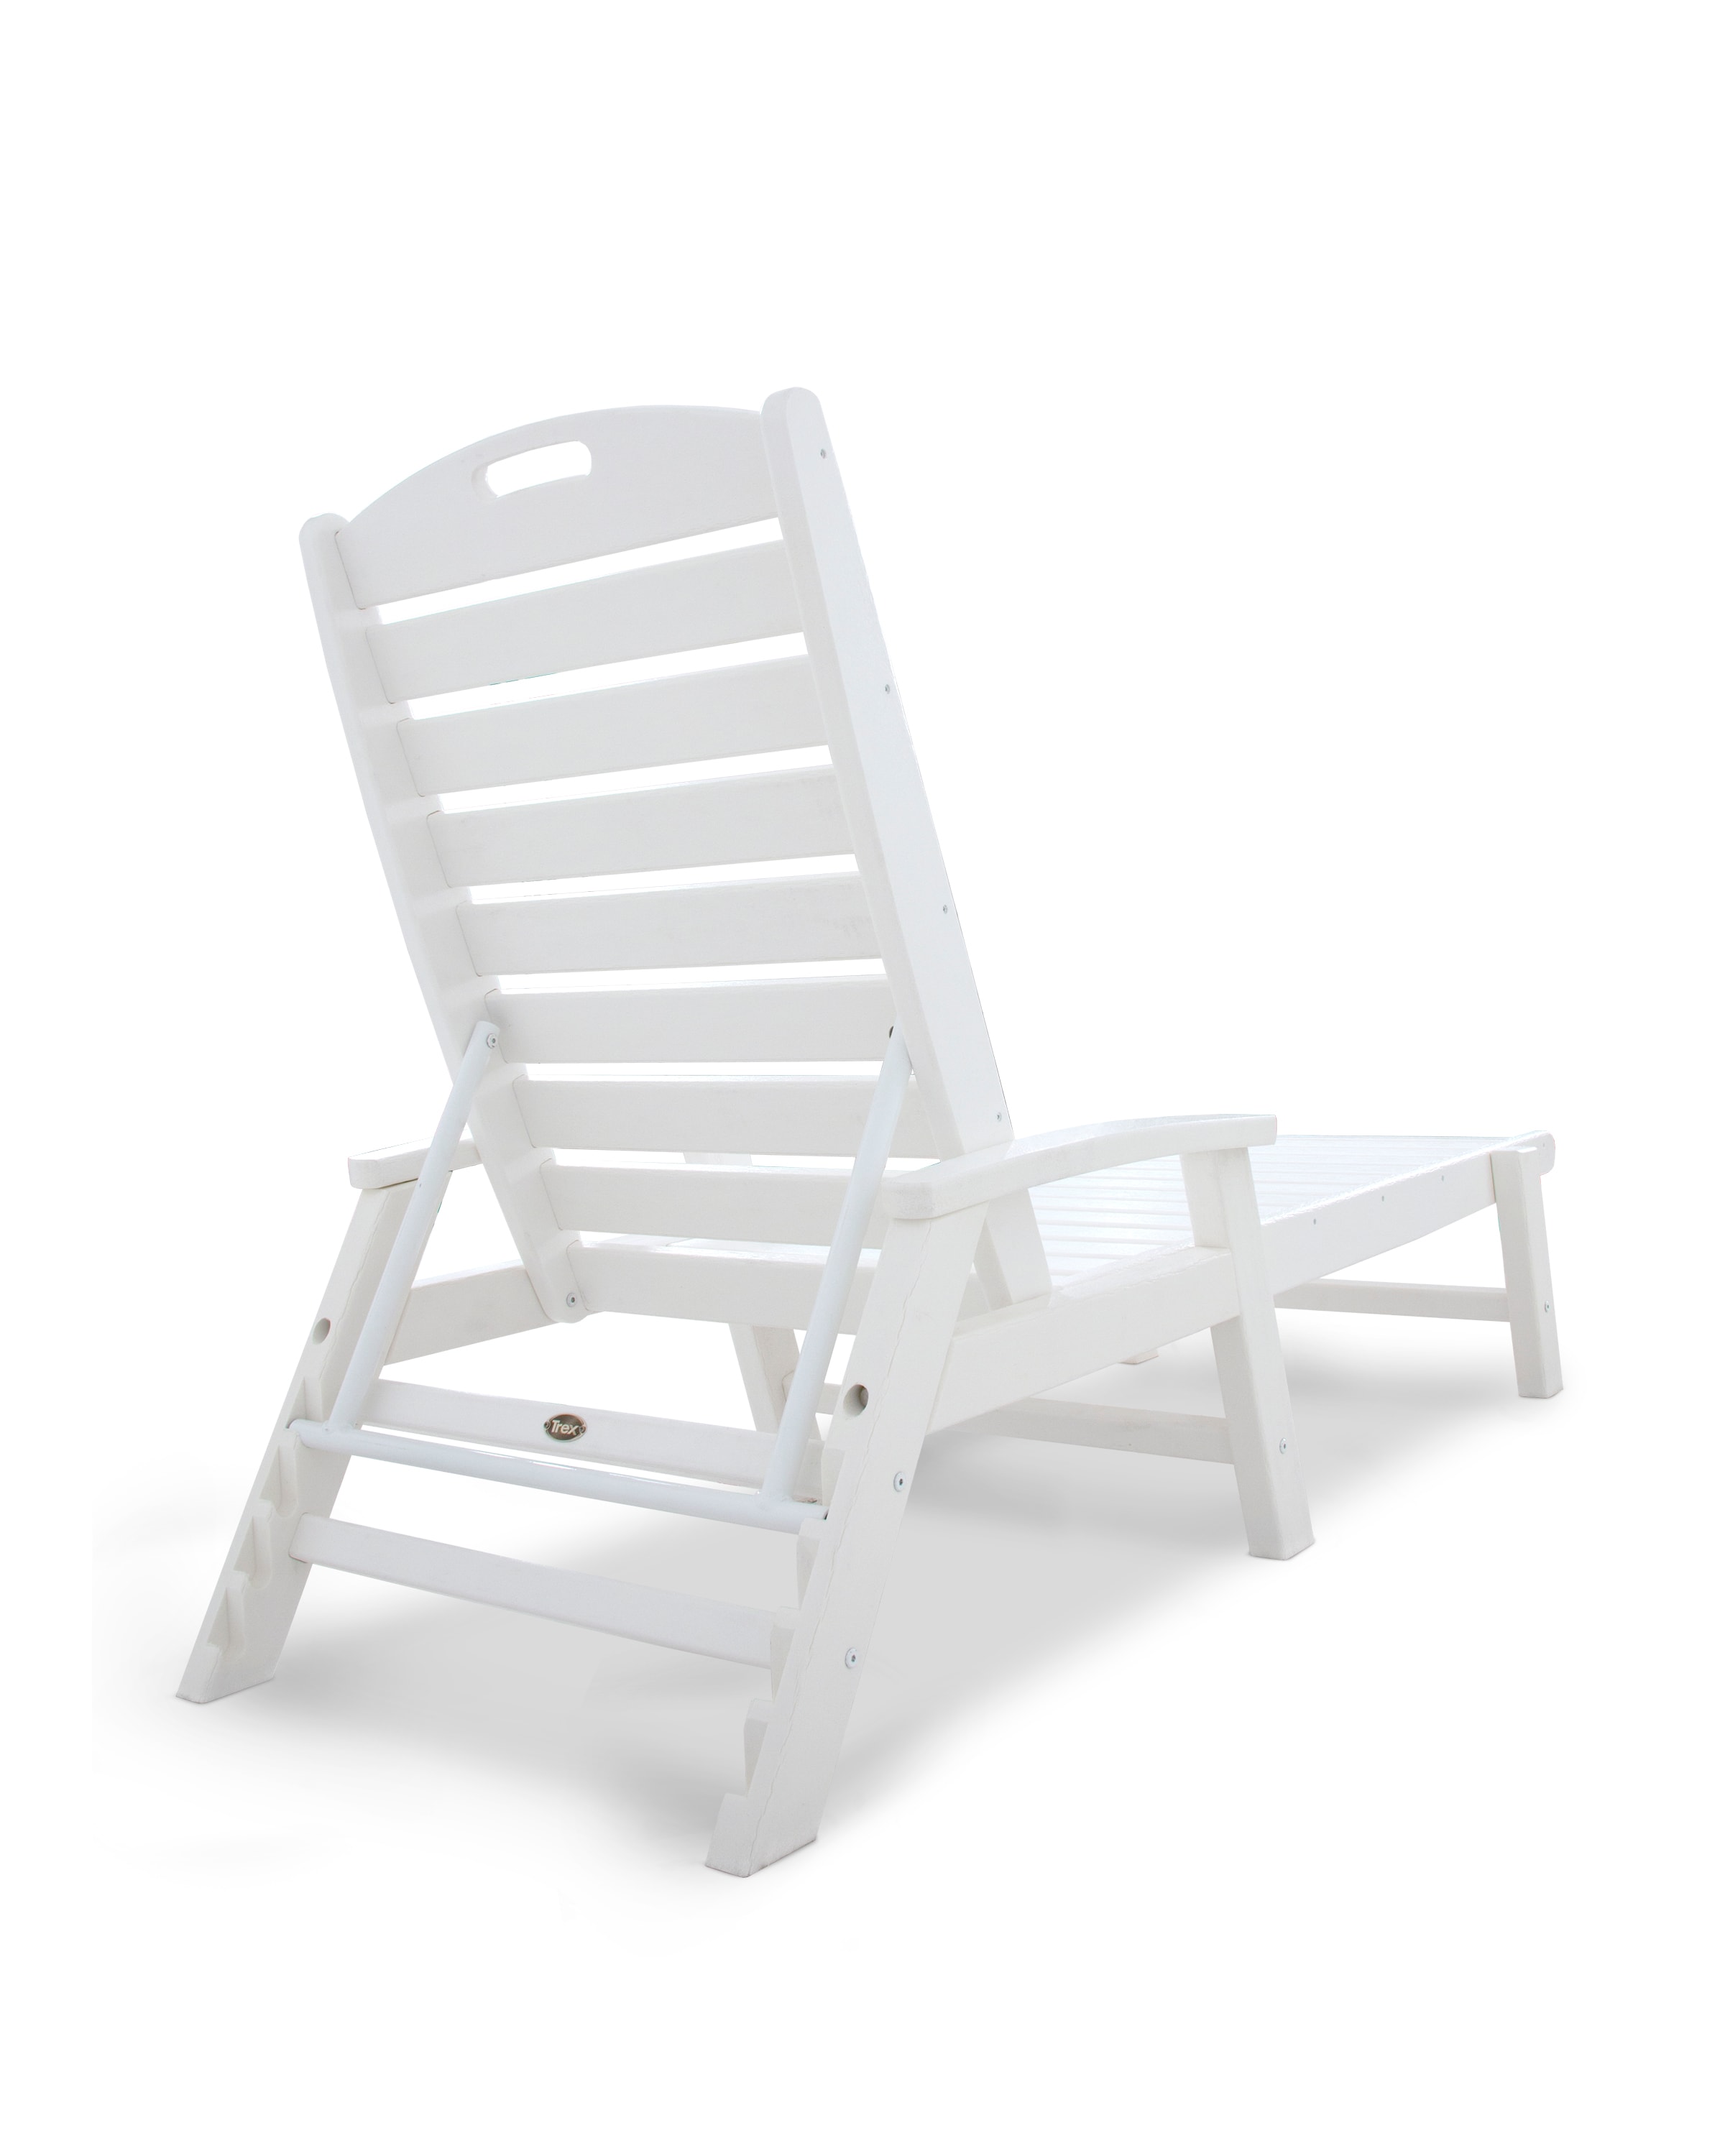 Trex Outdoor Furniture Yacht Club White Hdpe Frame Stationary Chaise Lounge Chairs With Slat 